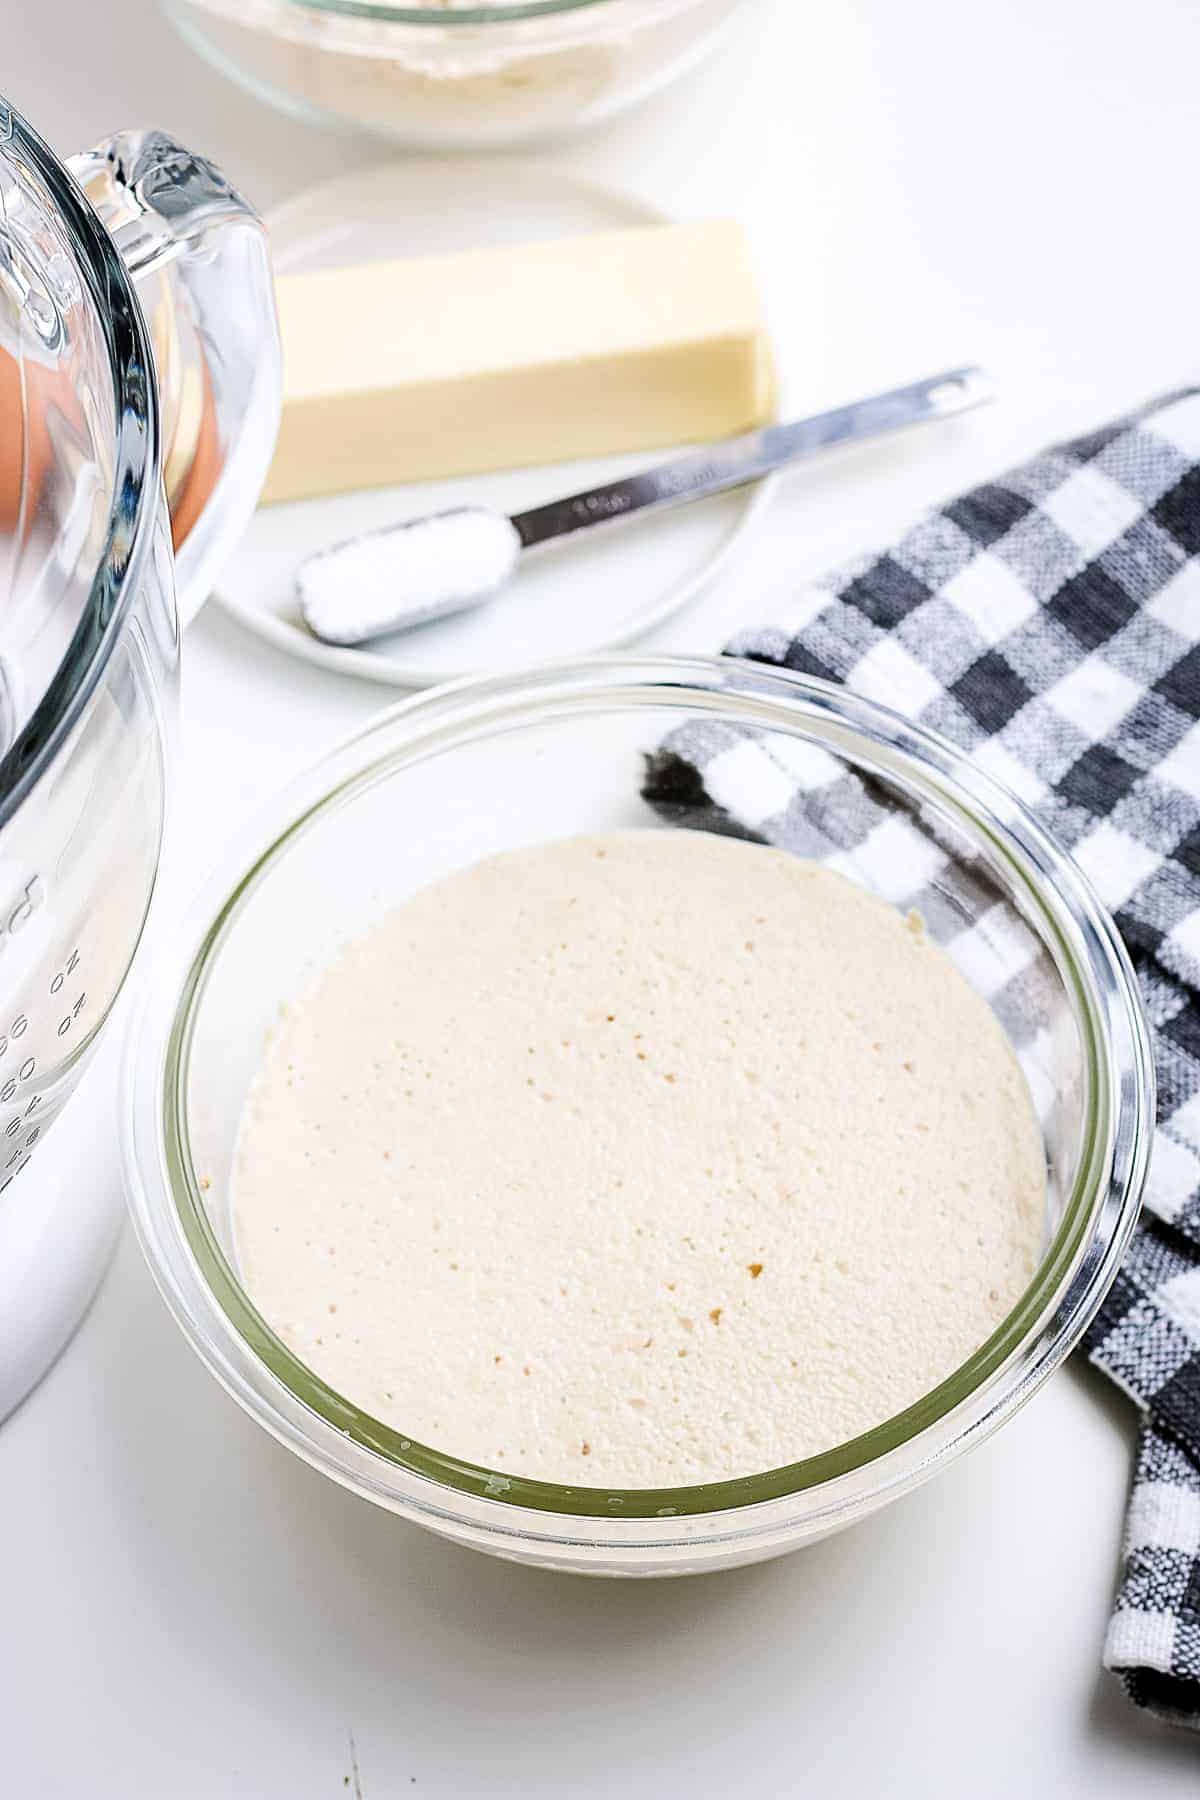 Proofed yeast in a glass bowl